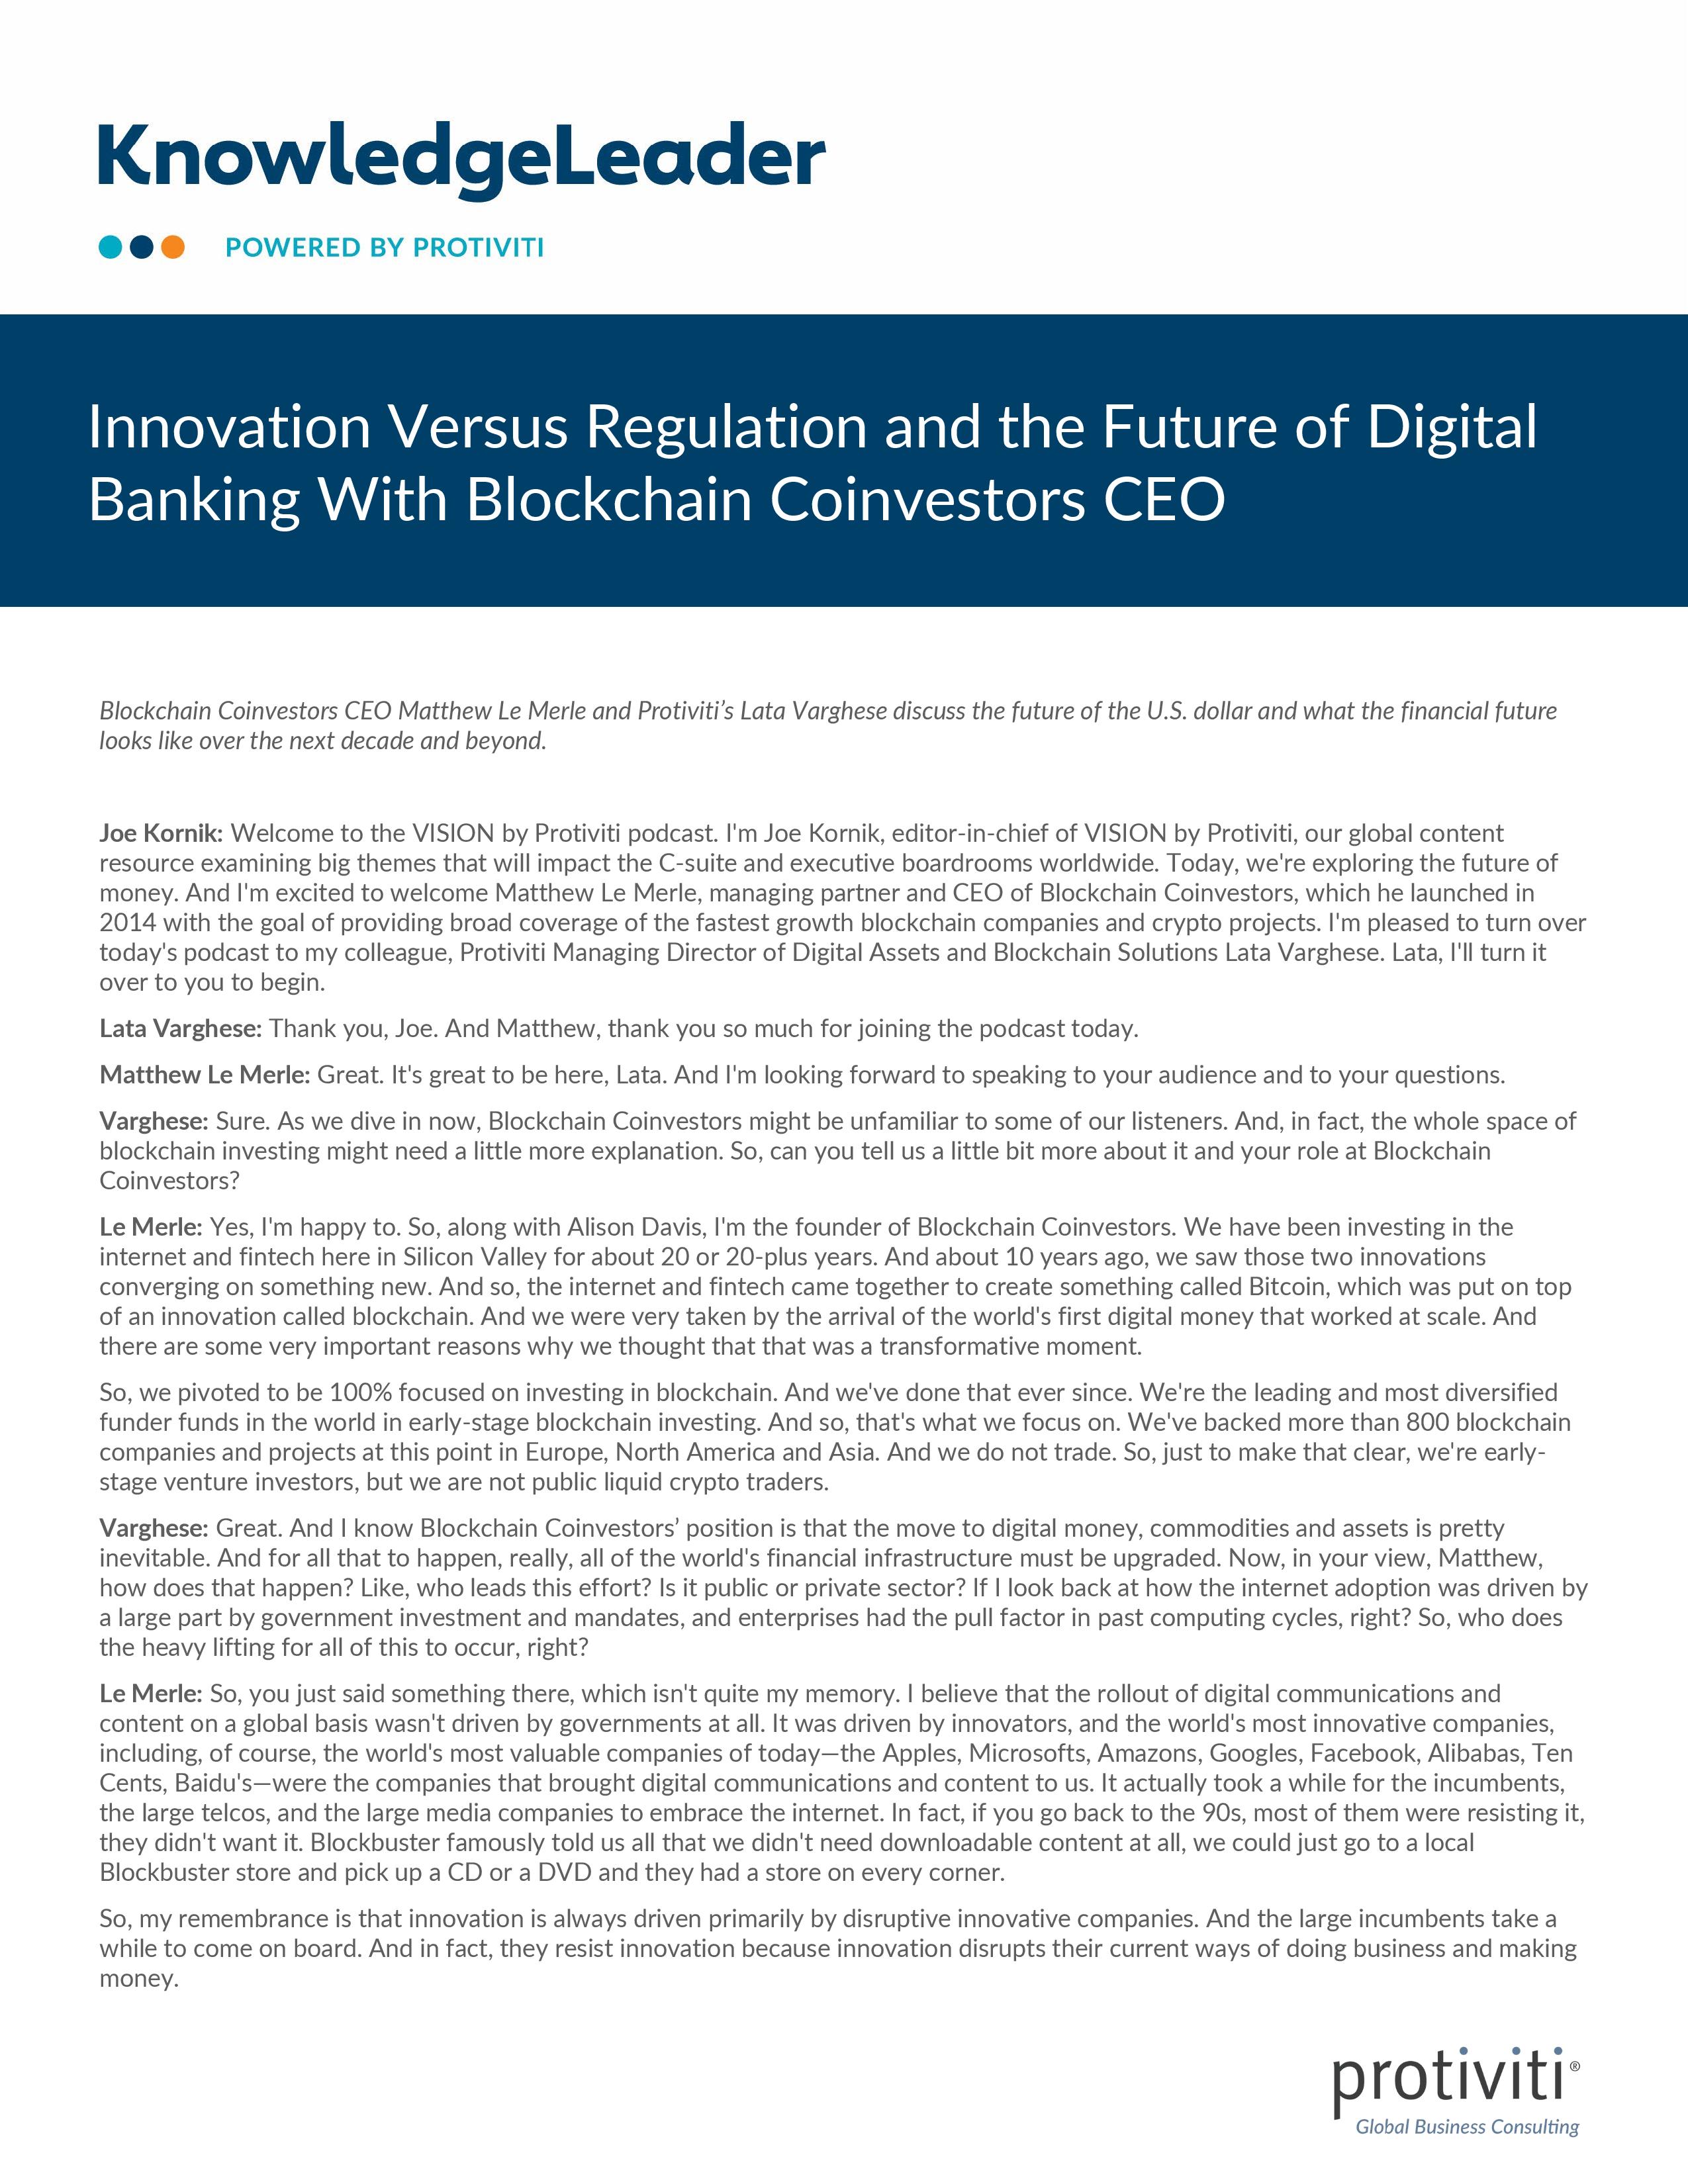 screenshot of the first page of Innovation Versus Regulation and the Future of Digital Banking With Blockchain Coinvestors CEO